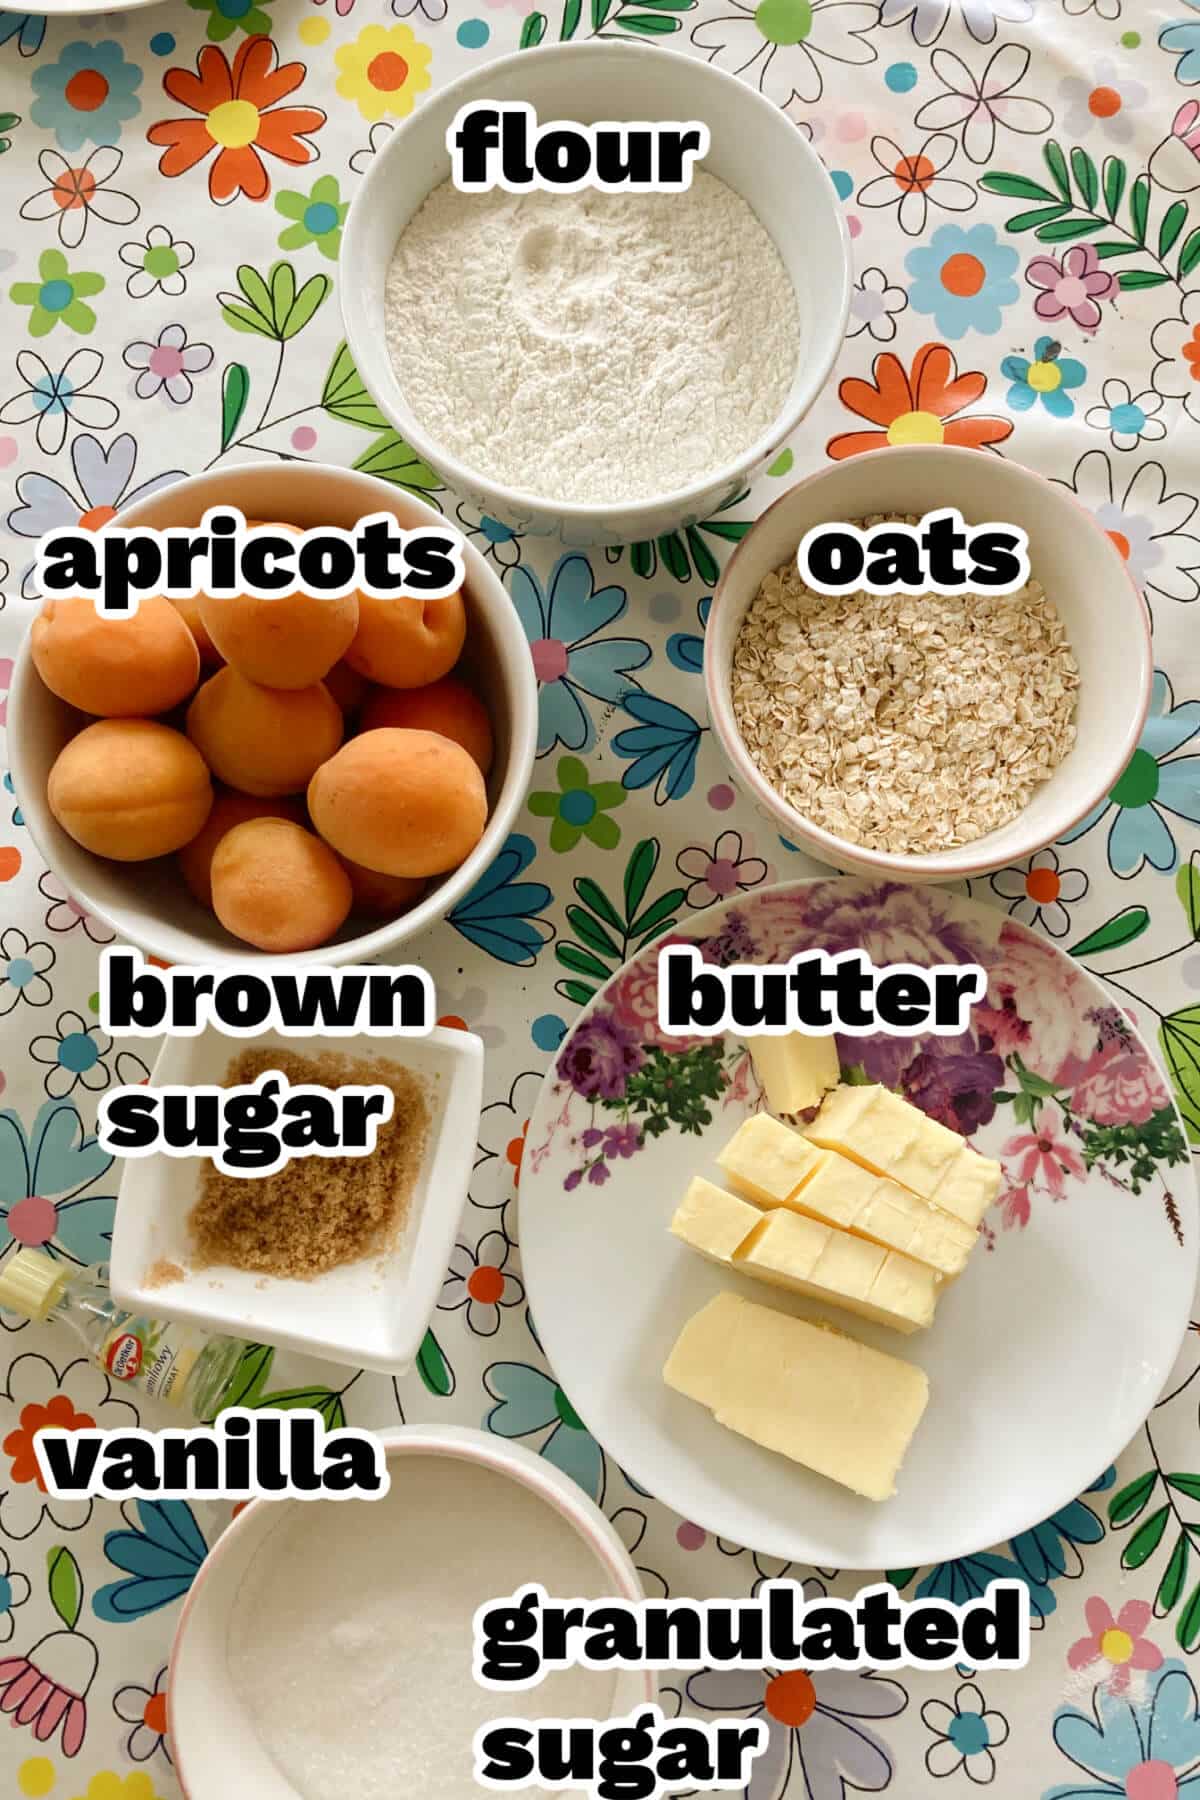 Ingredients needed to make apricot crumble.